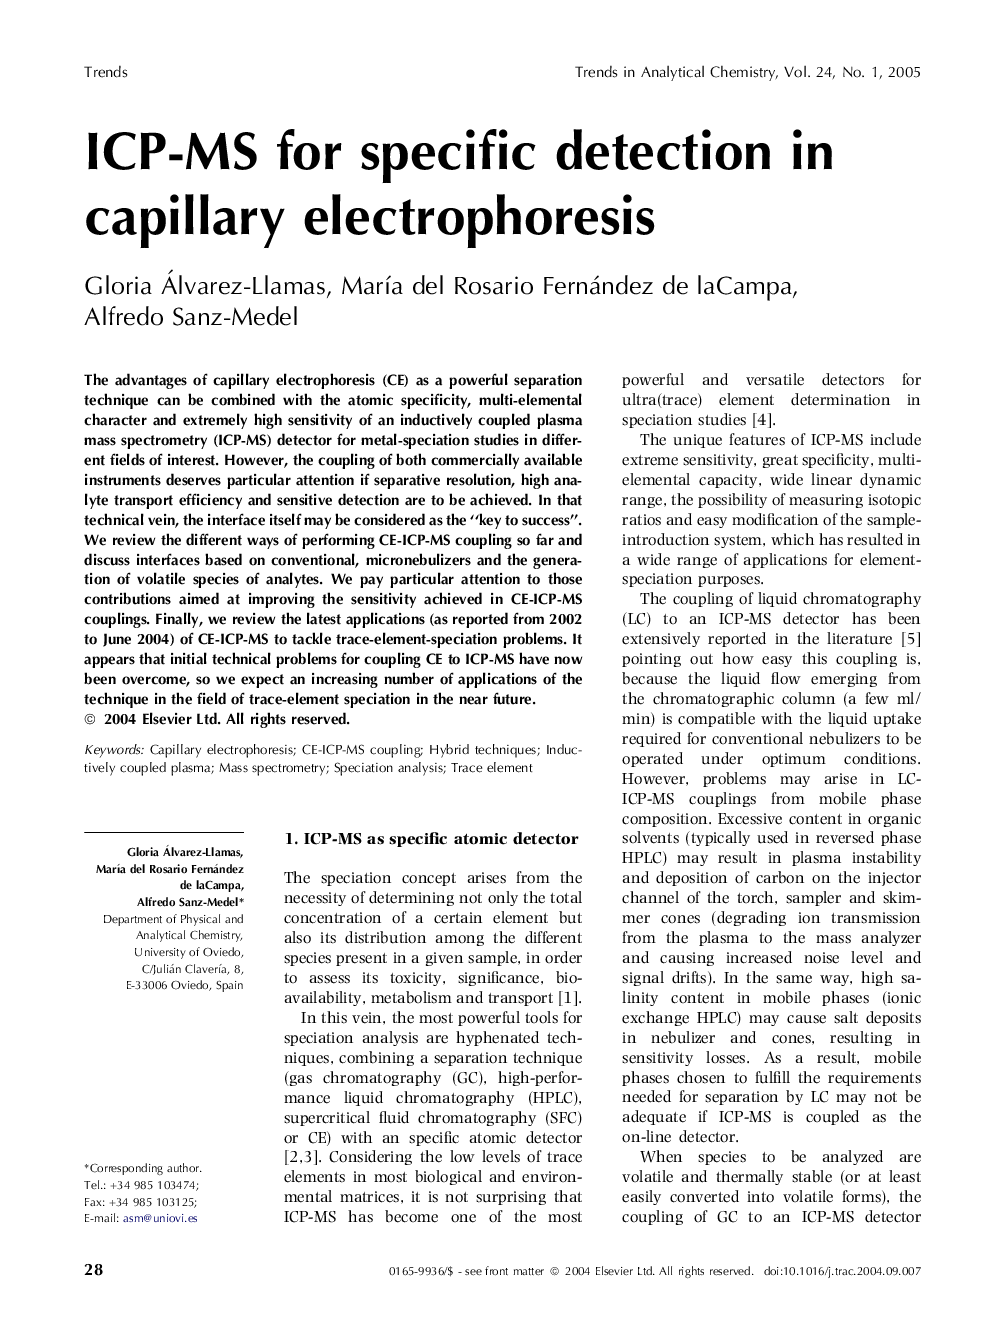 ICP-MS for specific detection in capillary electrophoresis